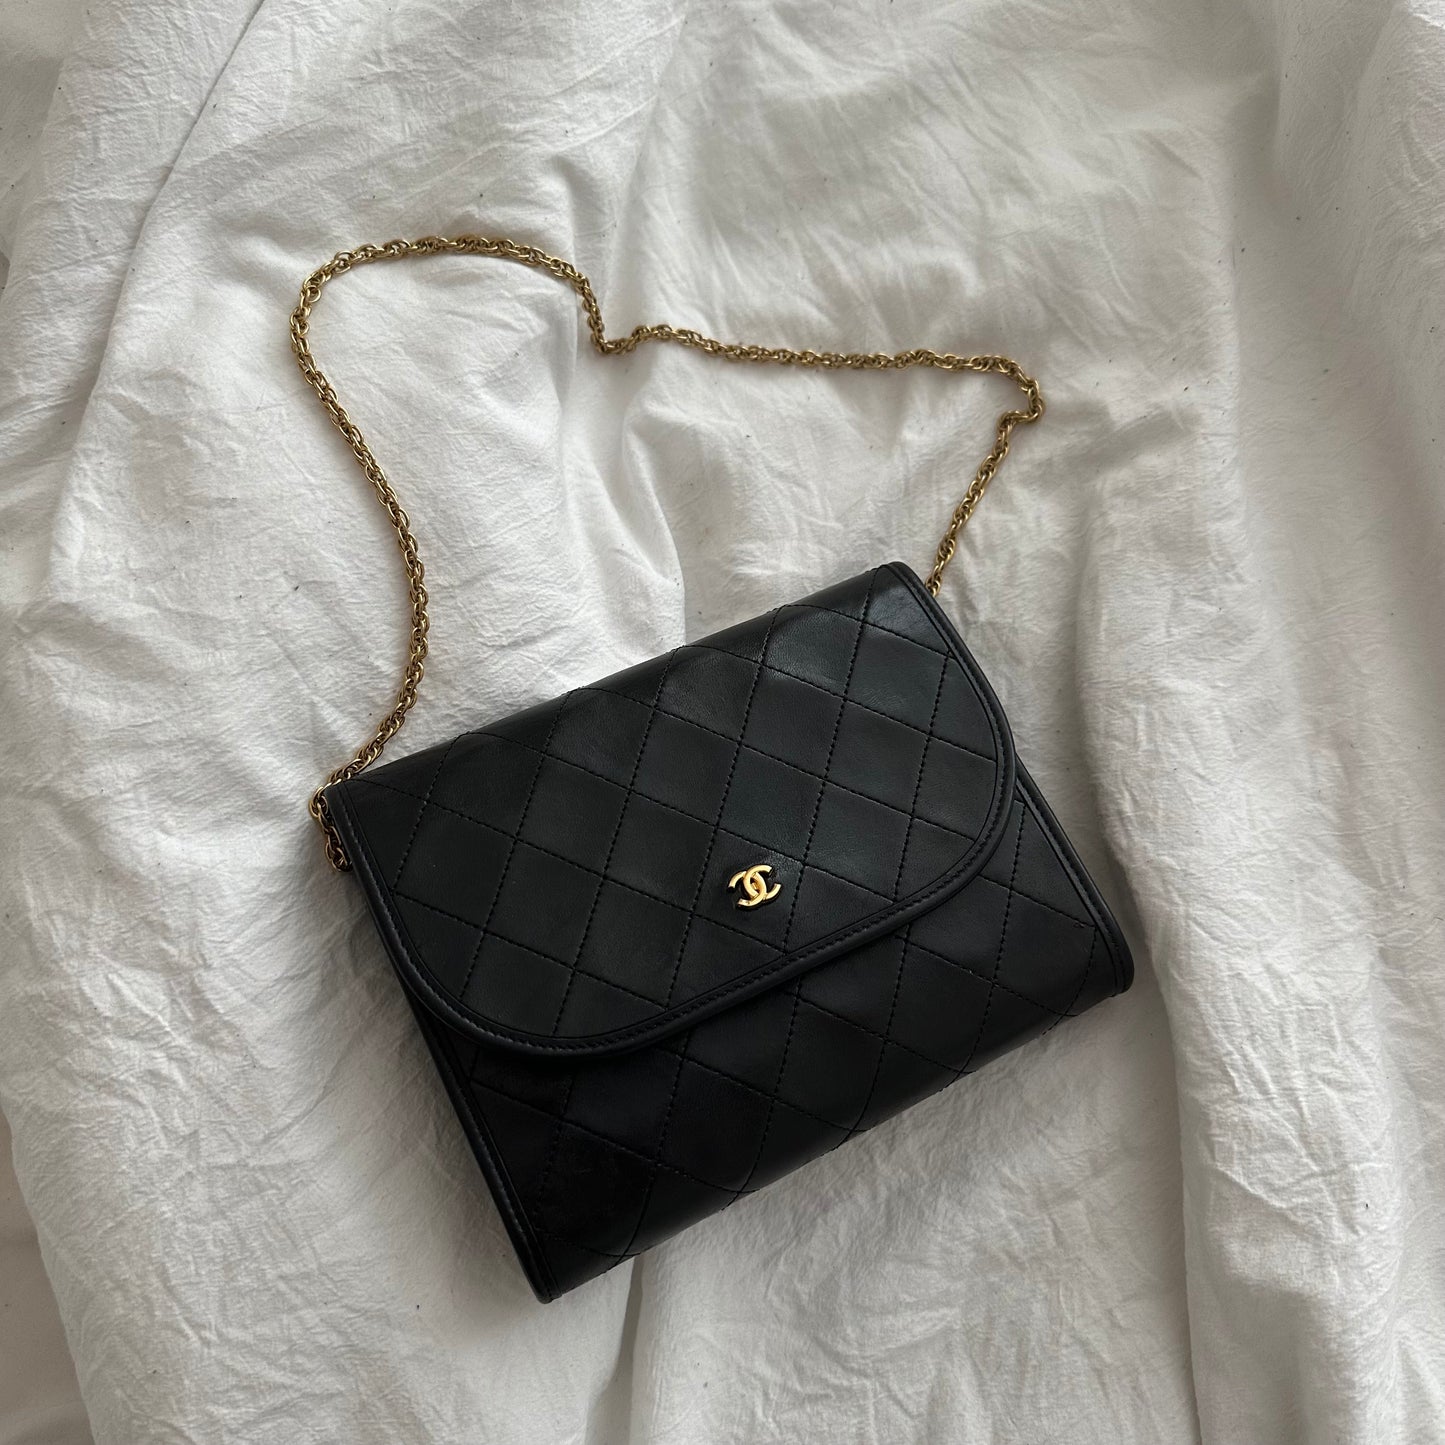 Chanel Black Leather Quilted Gold Convertible Small Bag